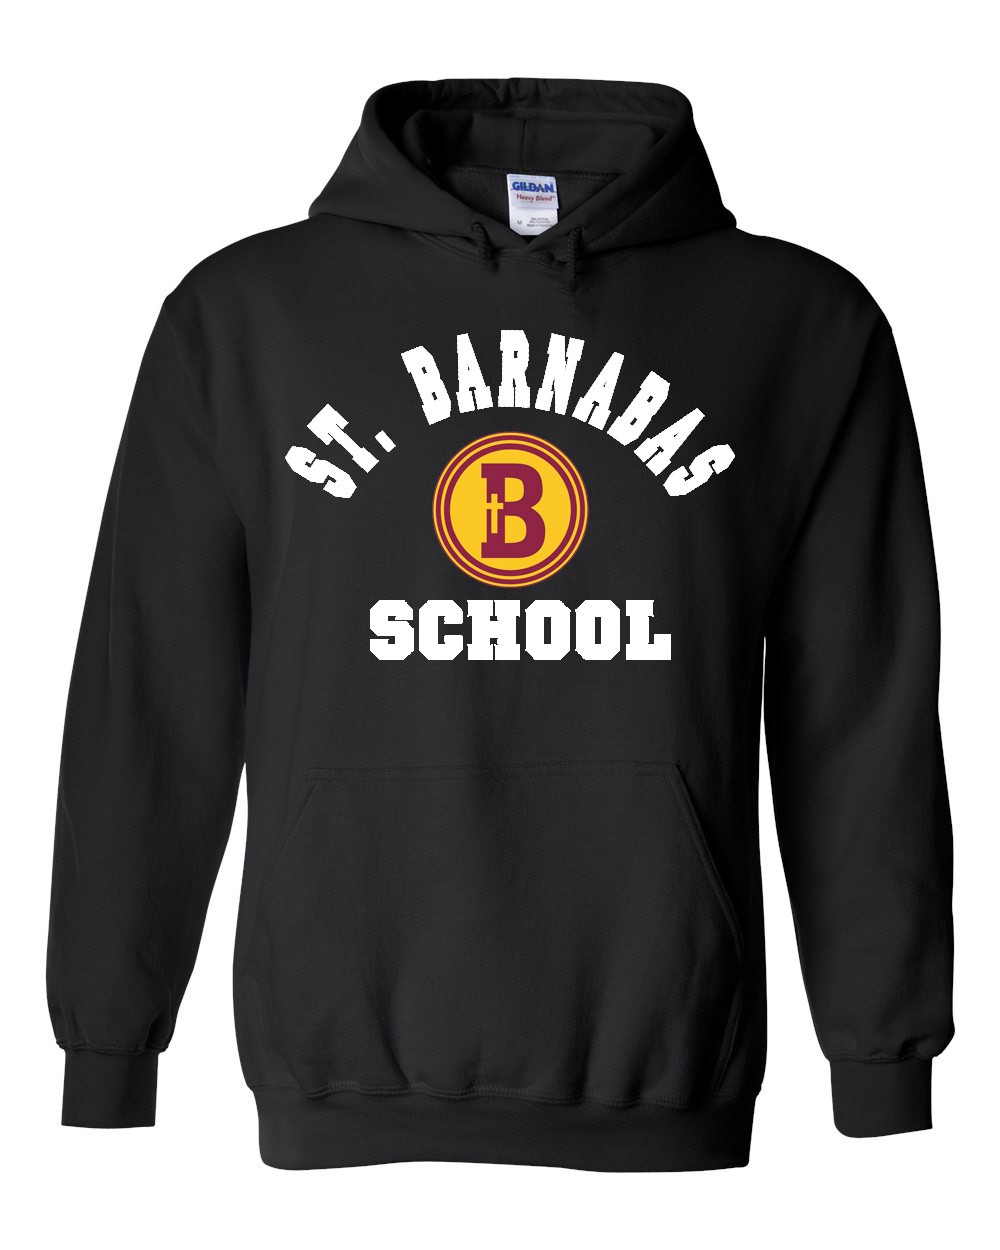 SBS Spirit Wear Pullover Hoodie w/ Logo - Please Allow 2-3 Weeks for Delivery